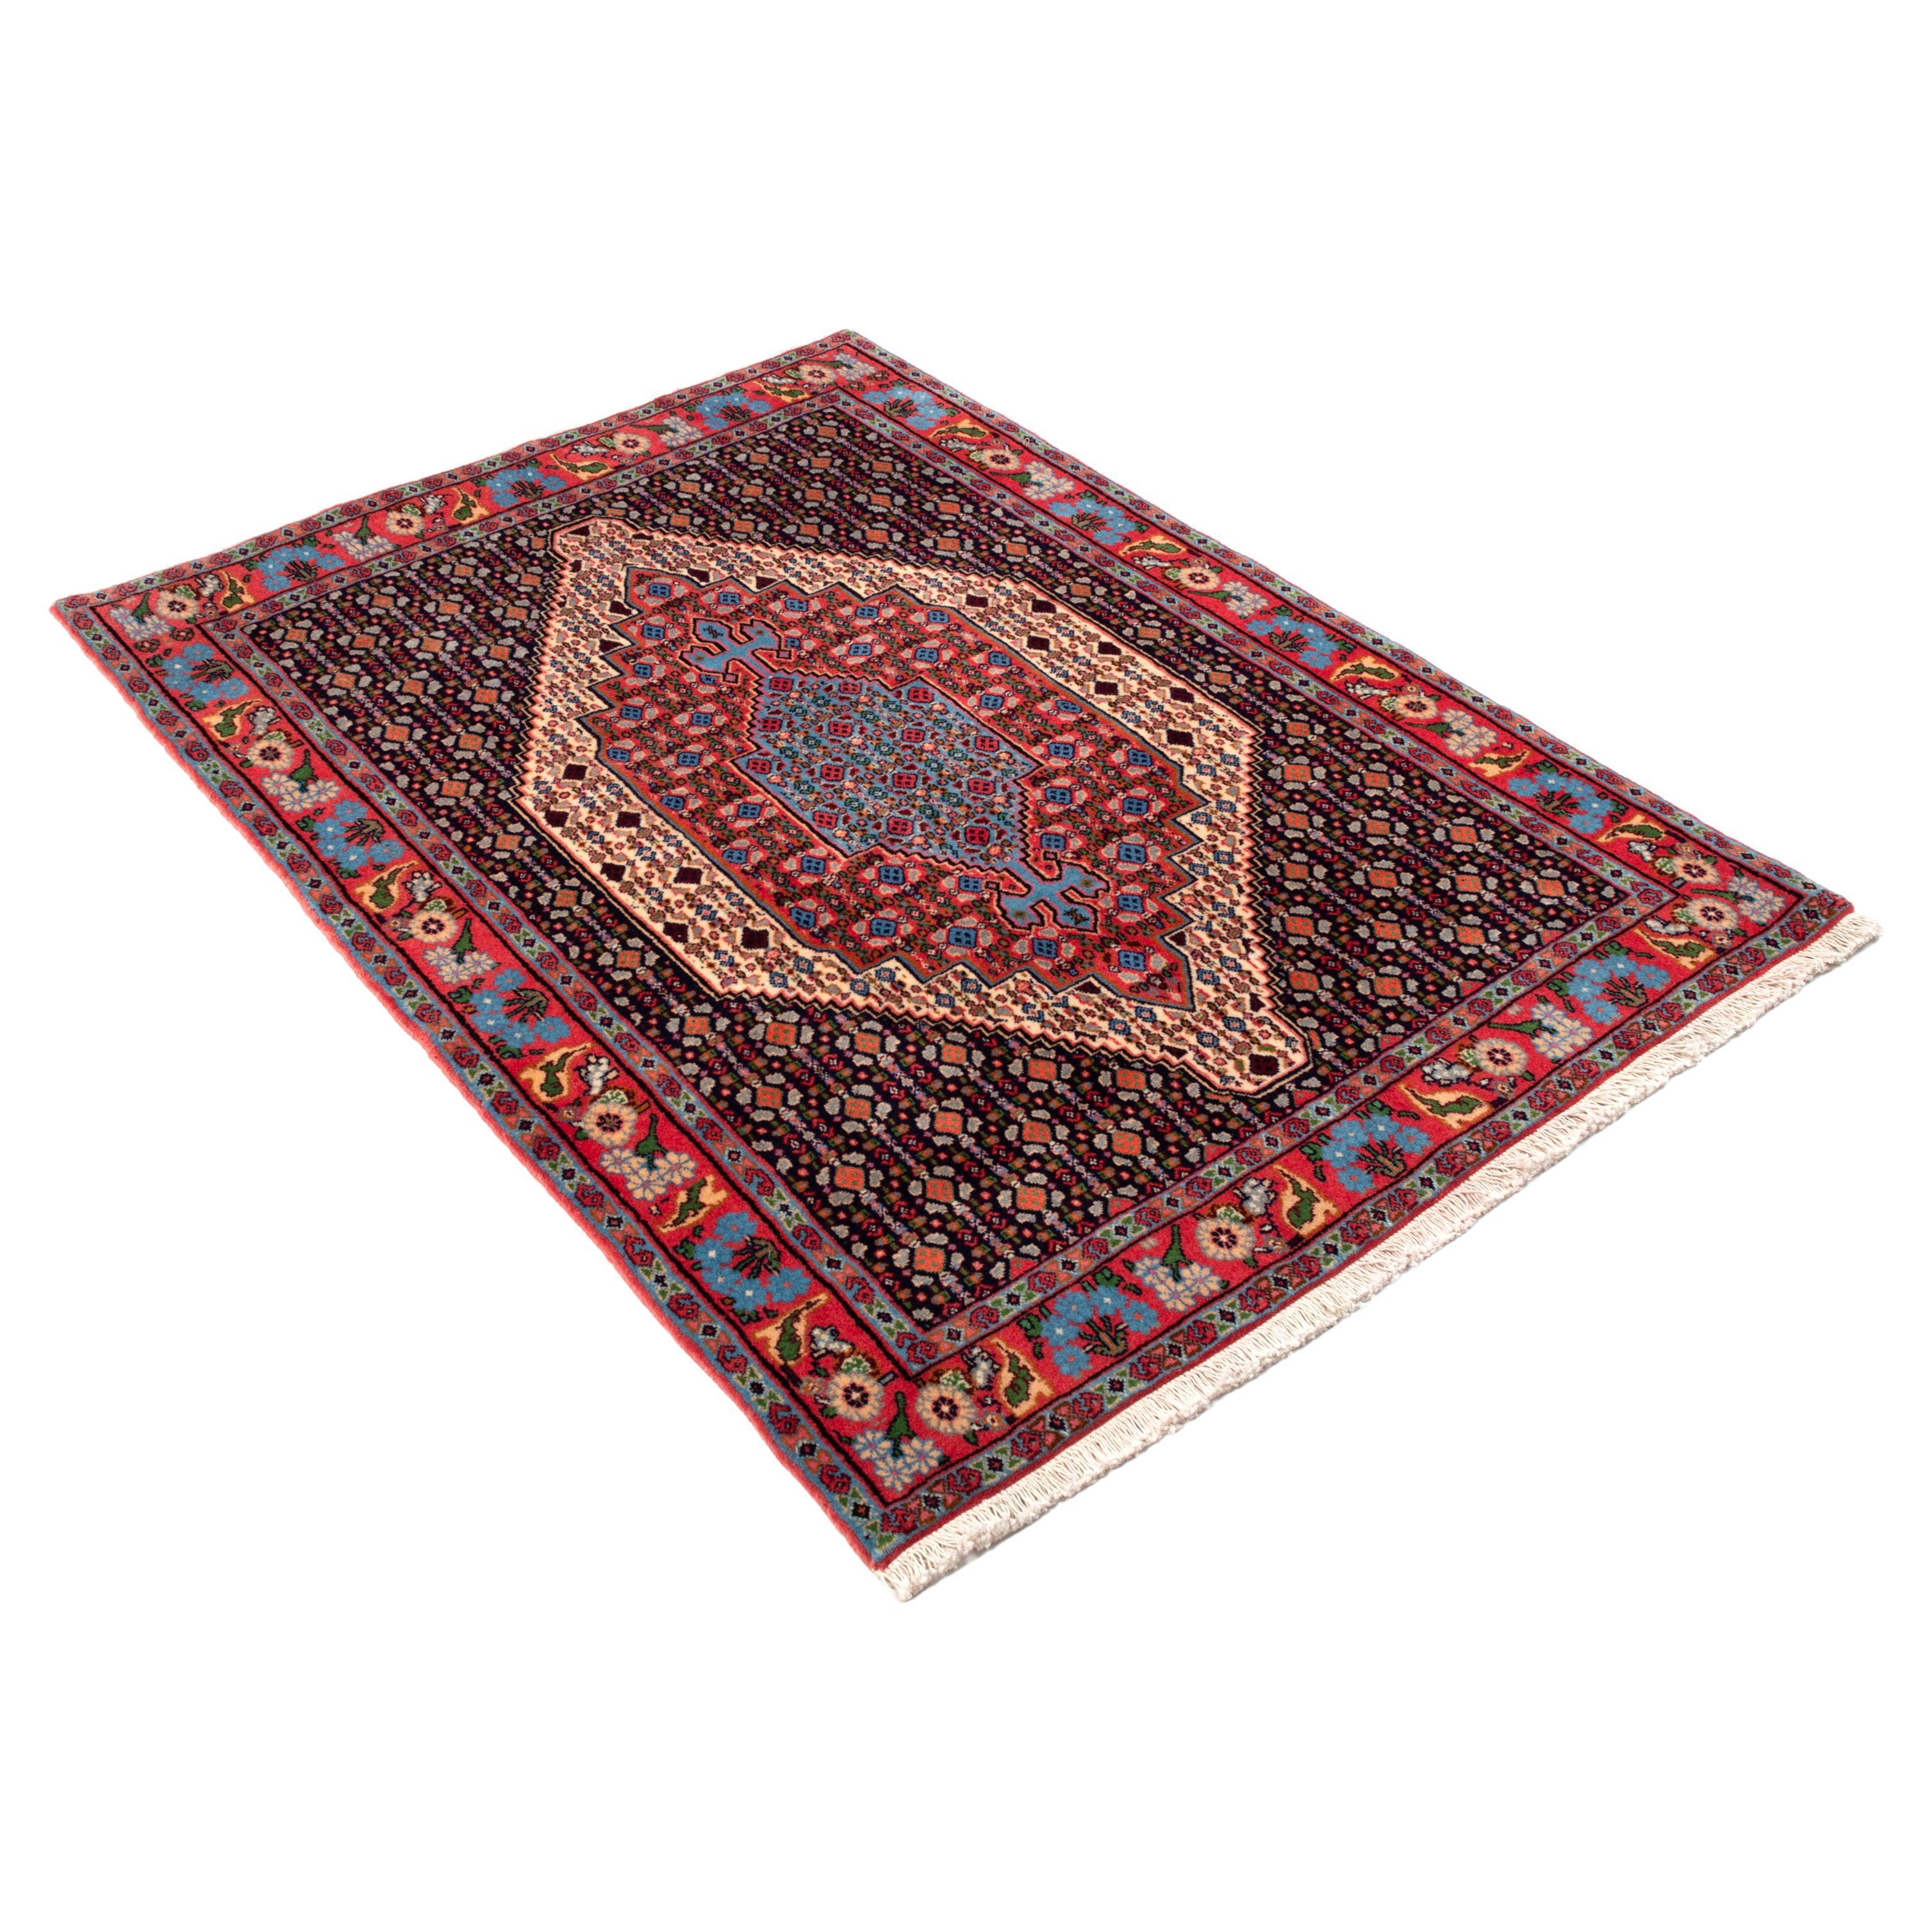 Persian Senneh rugs come from the Northwest region of Iran 
Central Medalion
Hand-knotted, fine wool weave, densely knotted on a cotton foundation.
Late 20th century

Measures: 116 x 154cm.

In excellent condition.